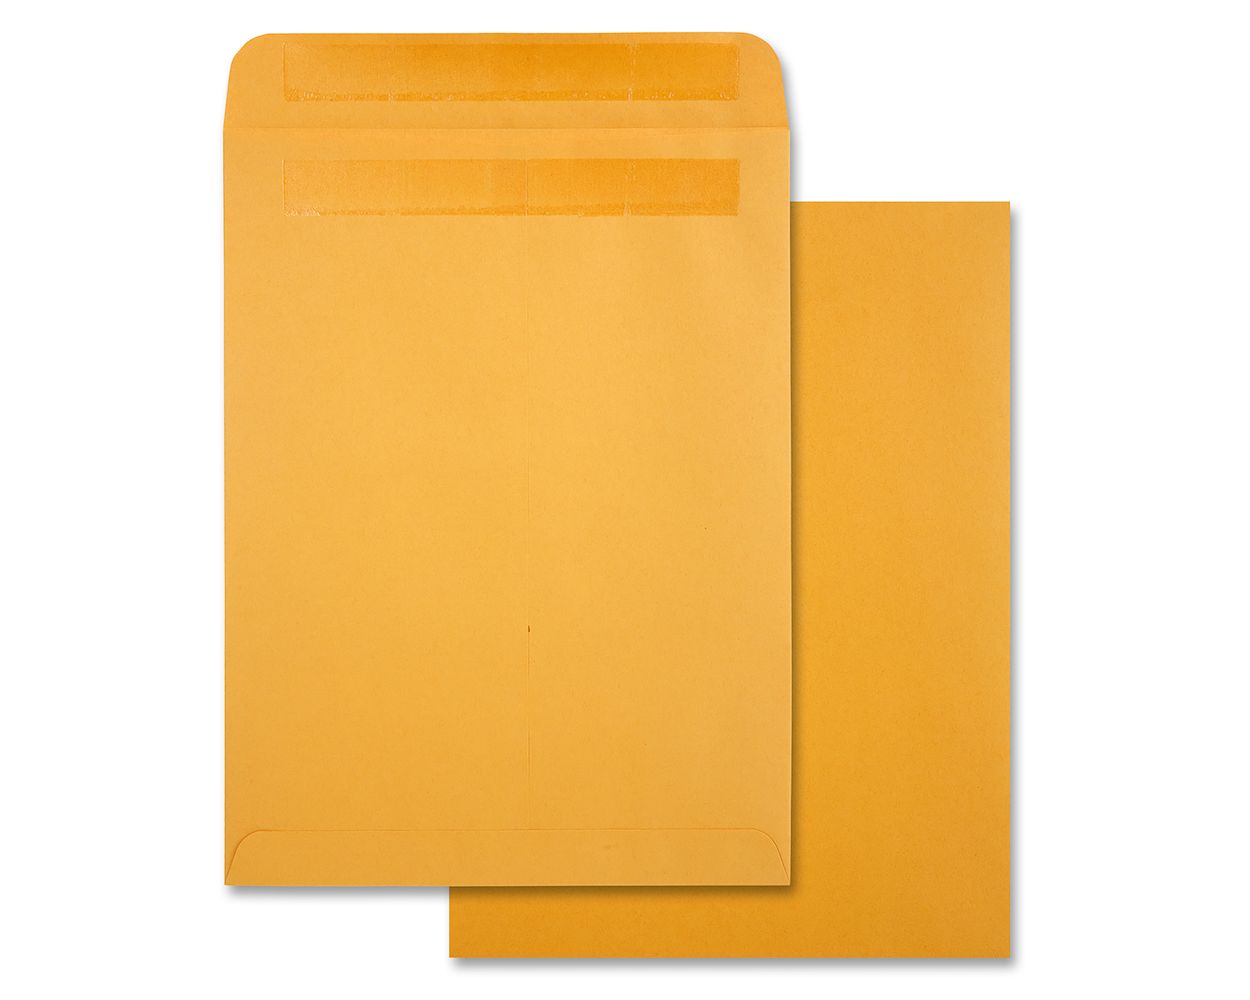 9 x 12 Catalog Envelopes with Self Seal Closure, for Mailing